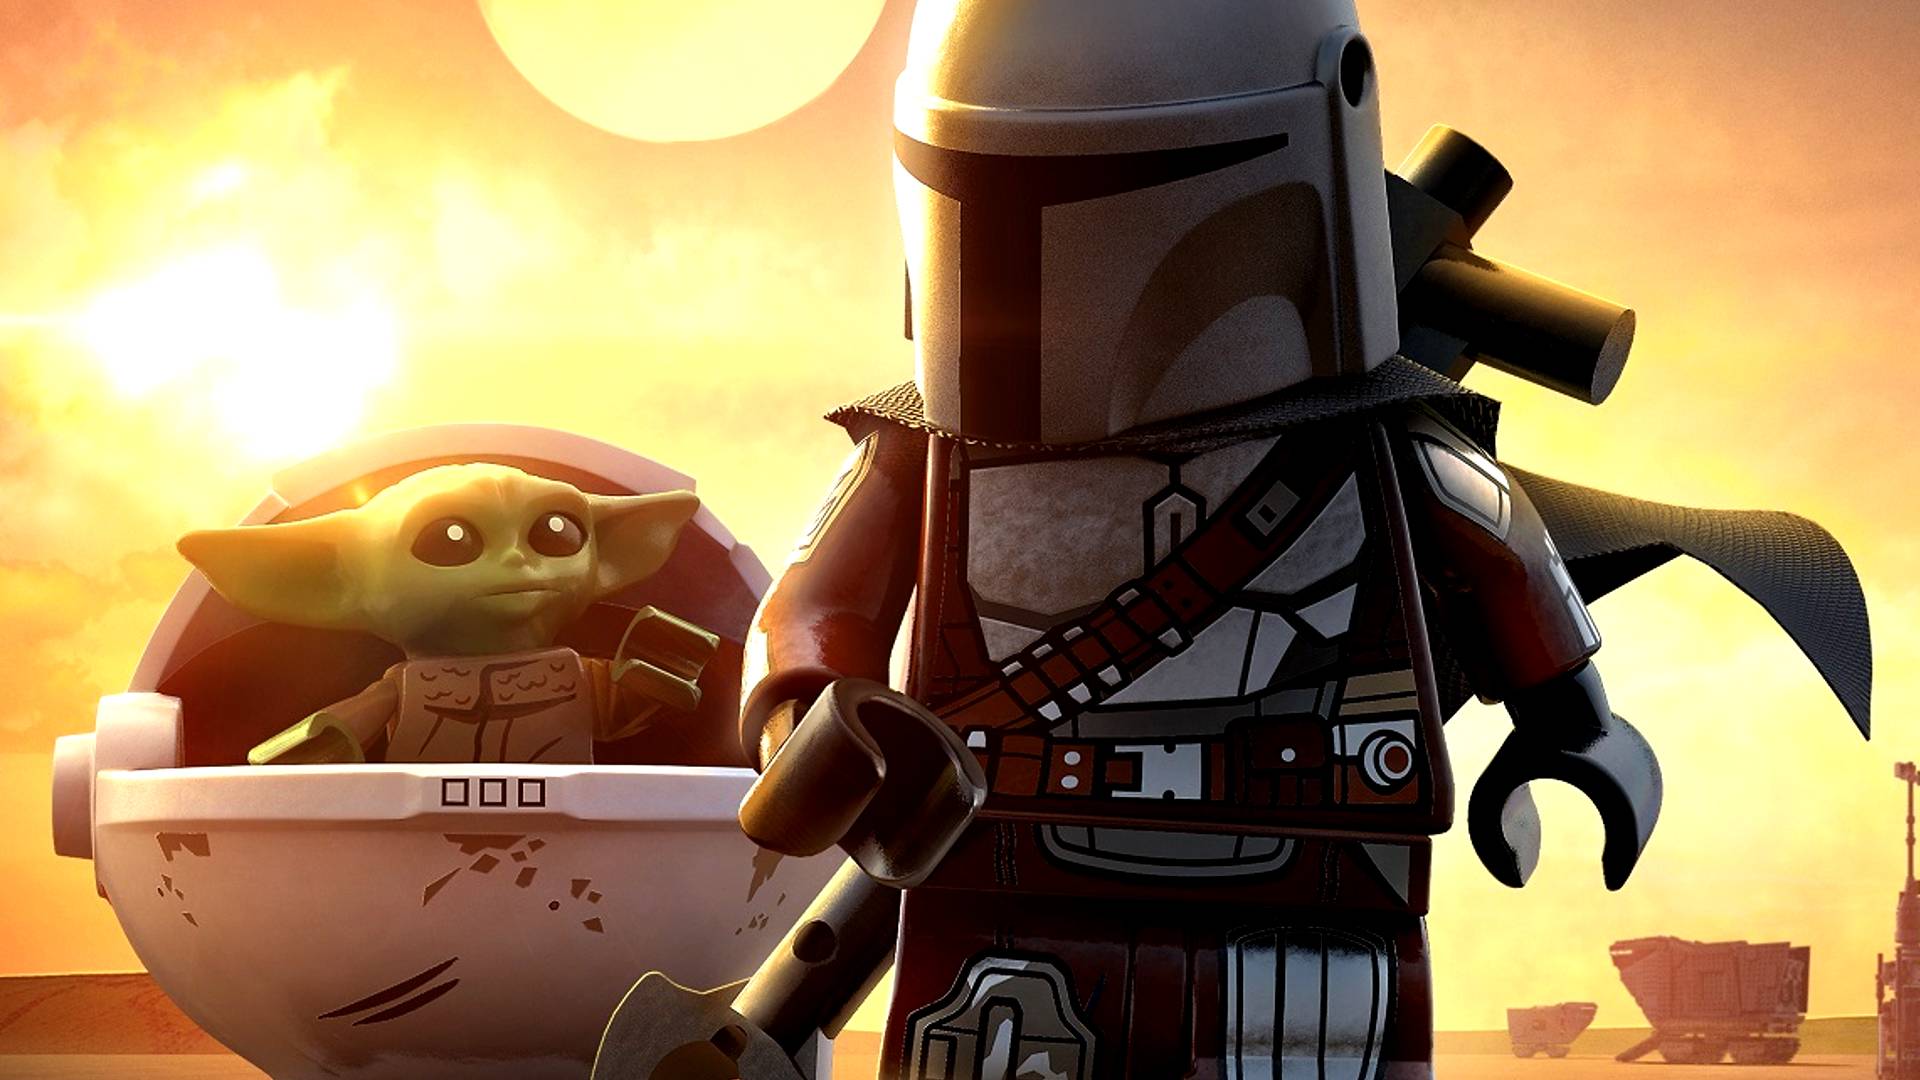 Lego Star Wars The Skywalker Saga DLC, Rogue One, and more